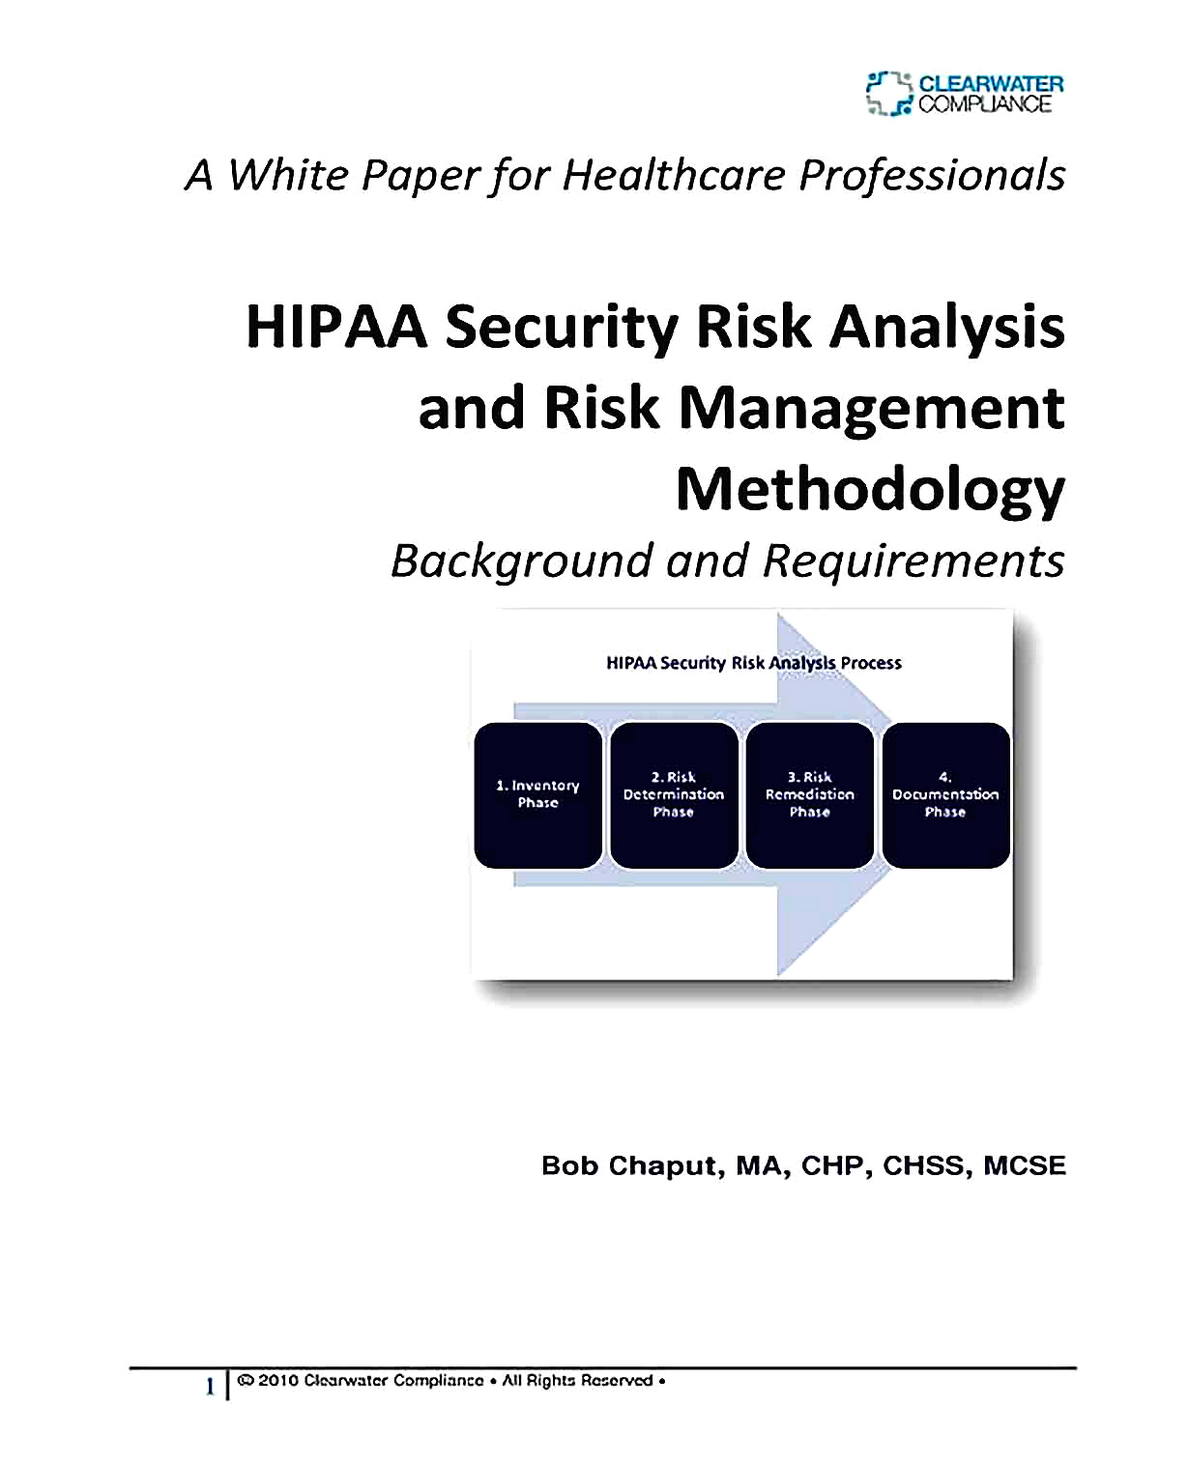 Templates for Simple HIPAA Security Risk Analysis 01 Sample